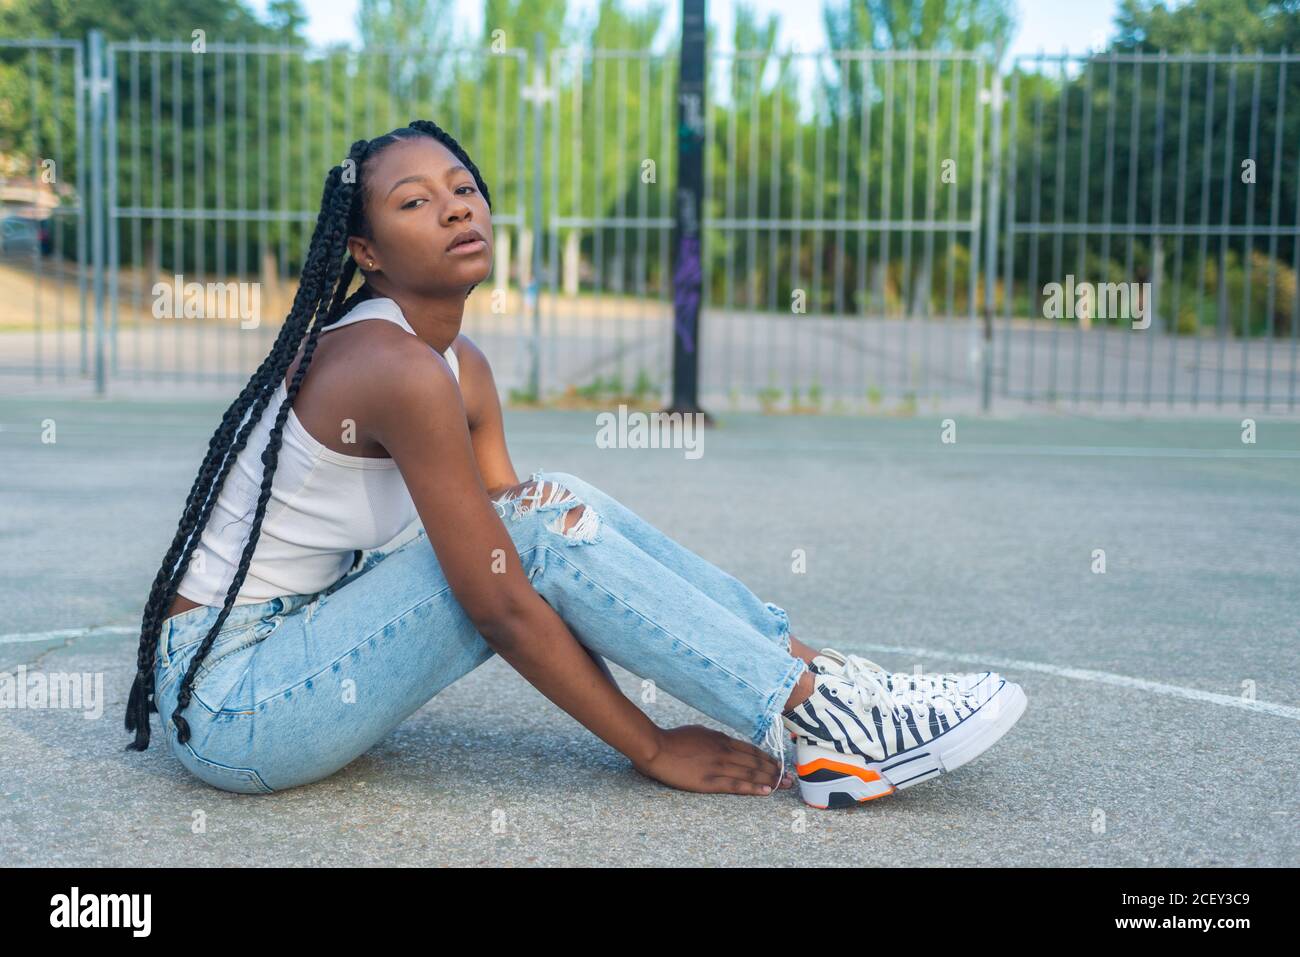 Full length of young African American female with braids wearing trendy  ripped jeans and white tank top with sneakers sitting against basketball  hoop on playground and looking at camera Stock Photo -